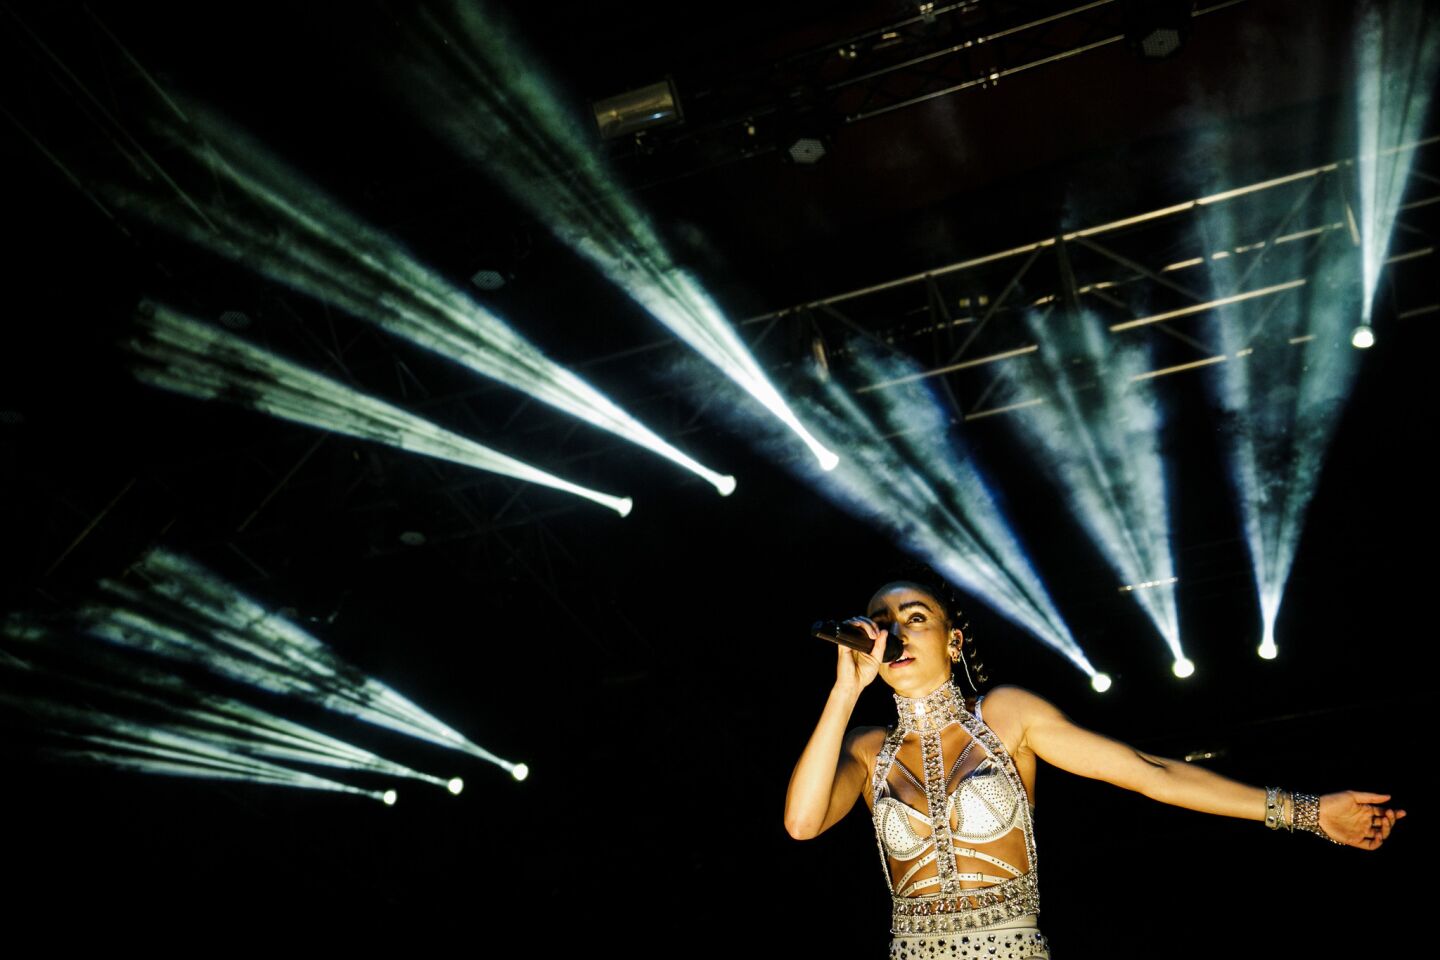 FKA Twigs performs at the Coachella Valley Music and Arts Festival on April 18.